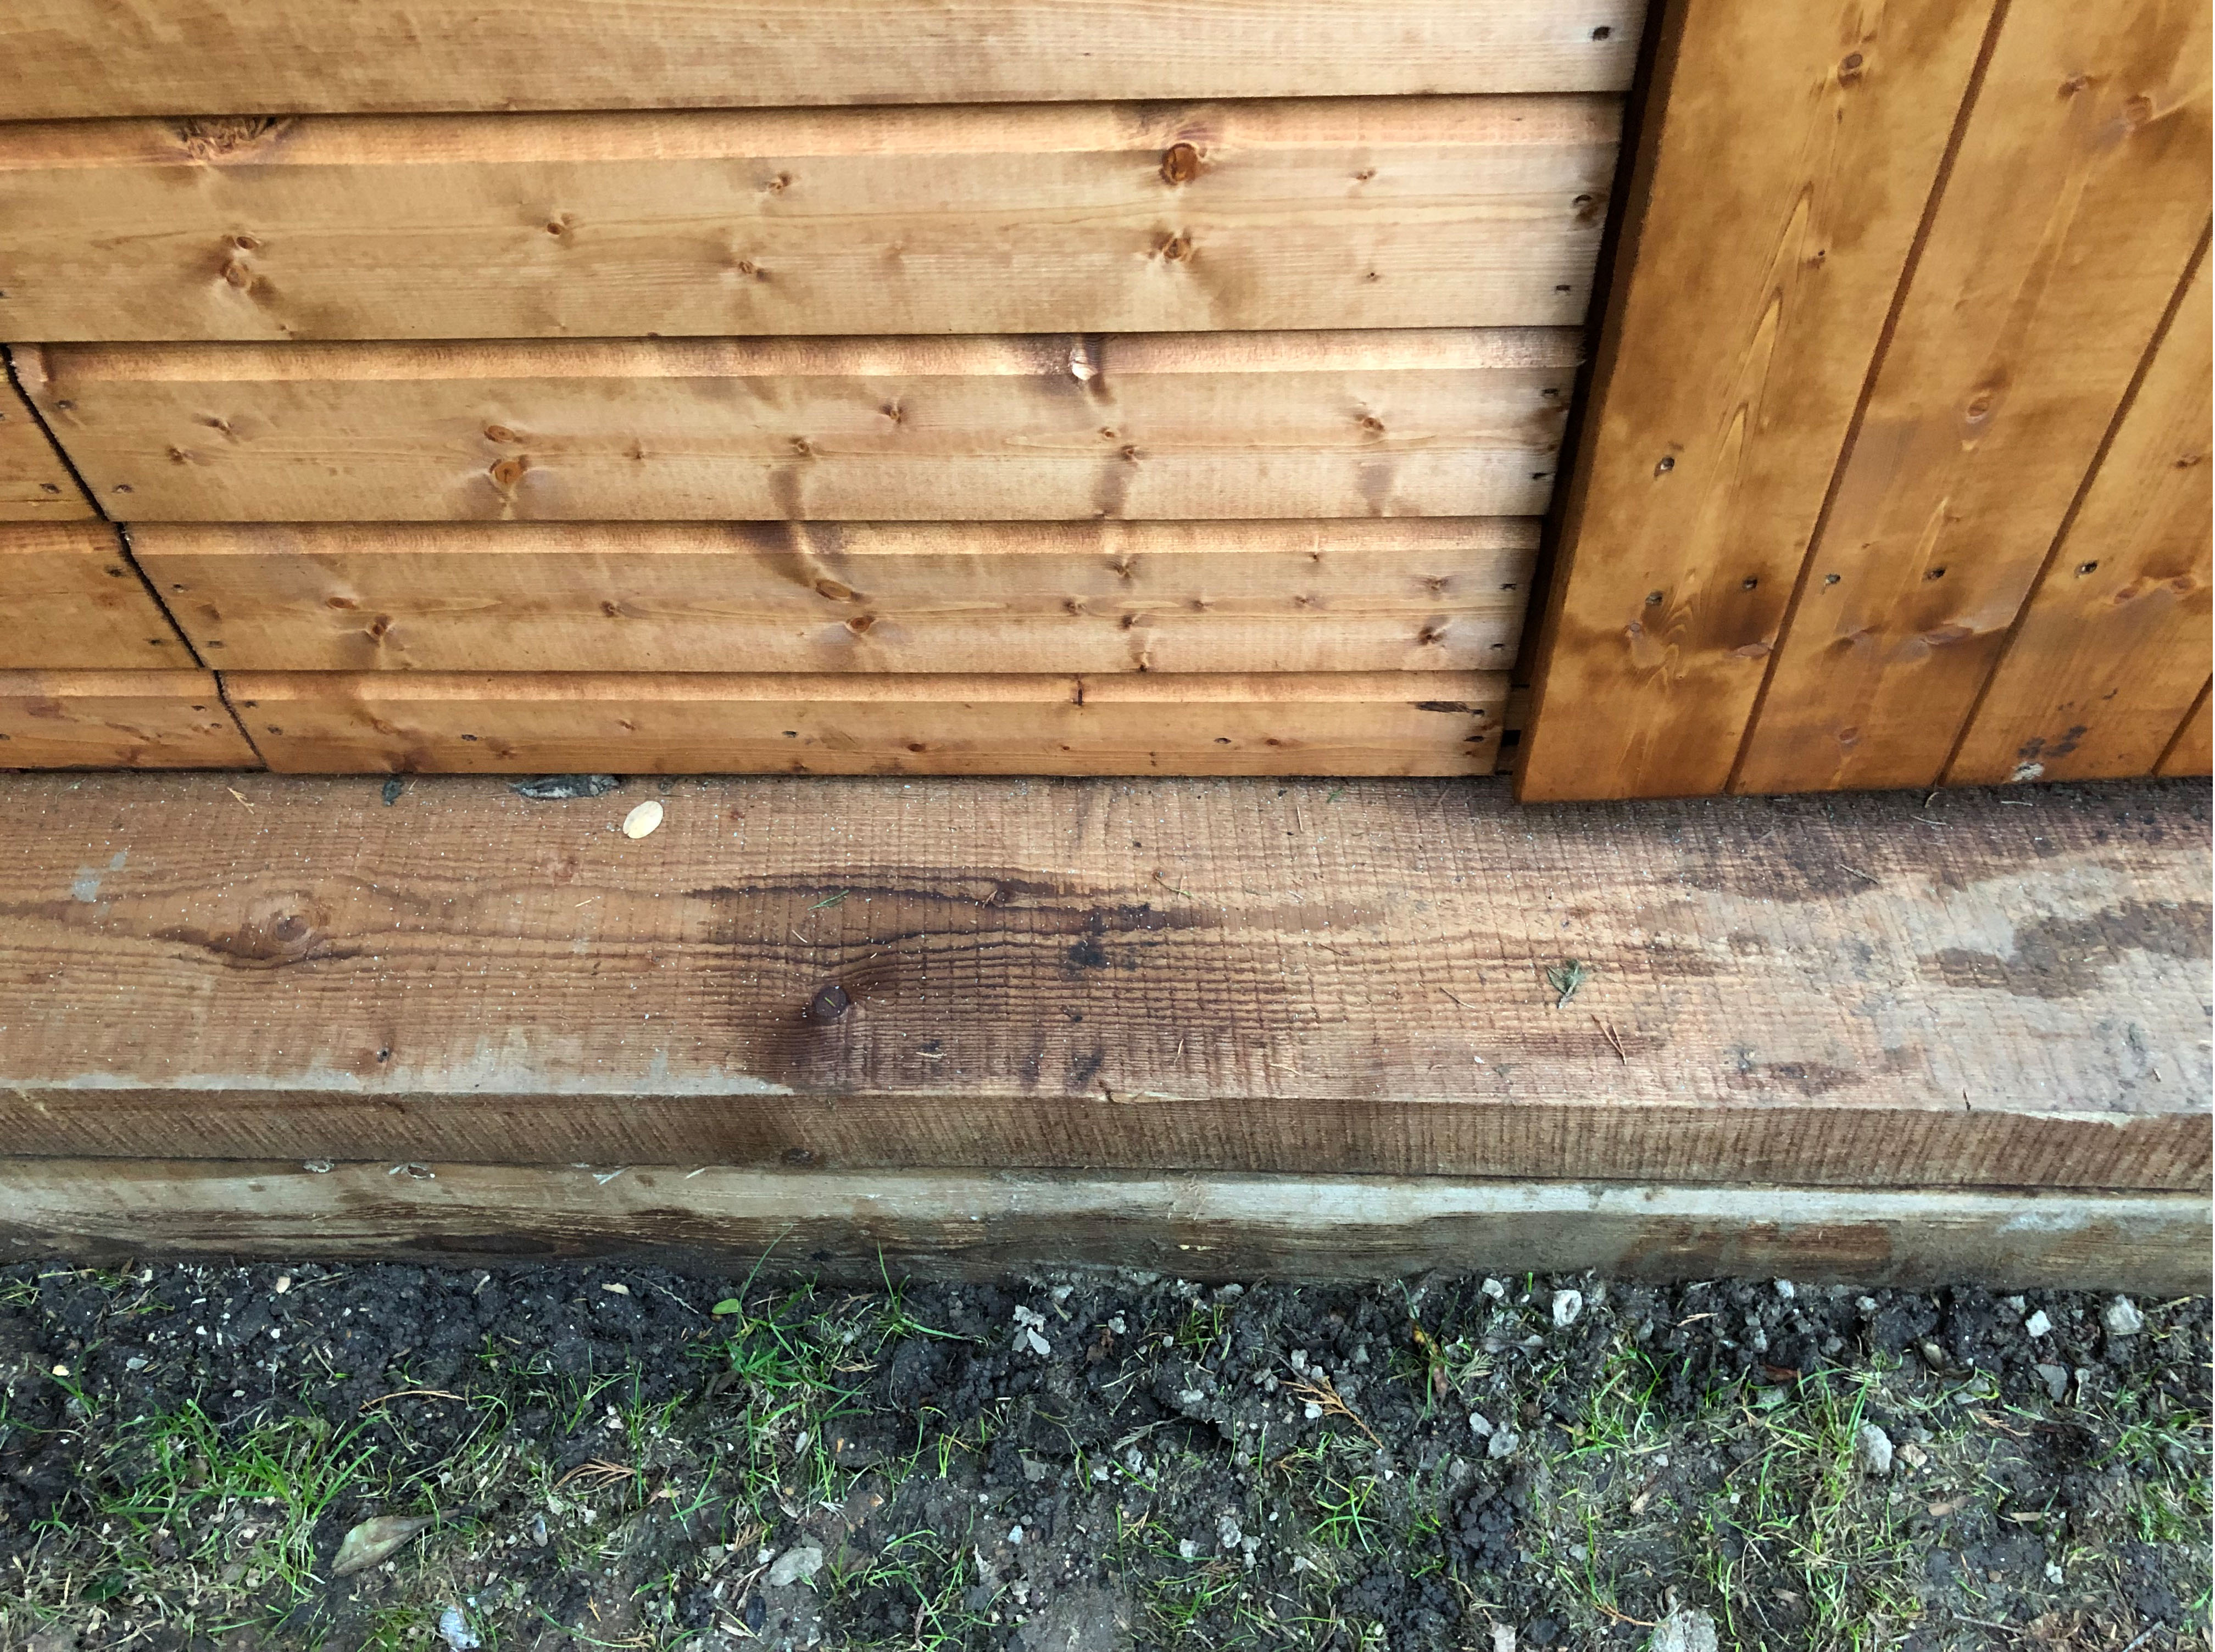 lower front section of a wooden shed